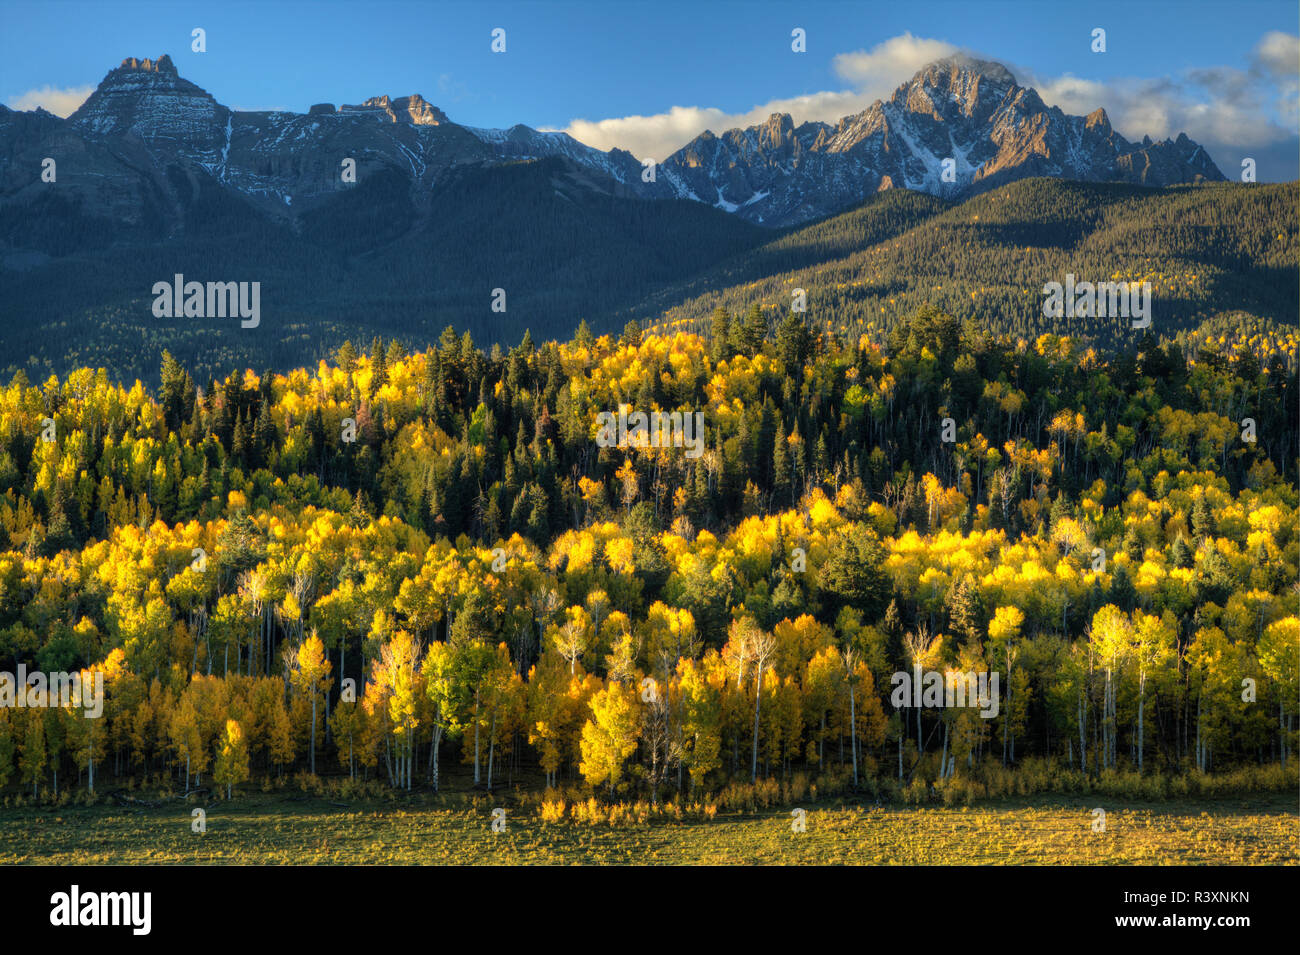 USA, Colorado, San Juan Mountains. Mt. Sneffels and forest at sunrise. Stock Photo